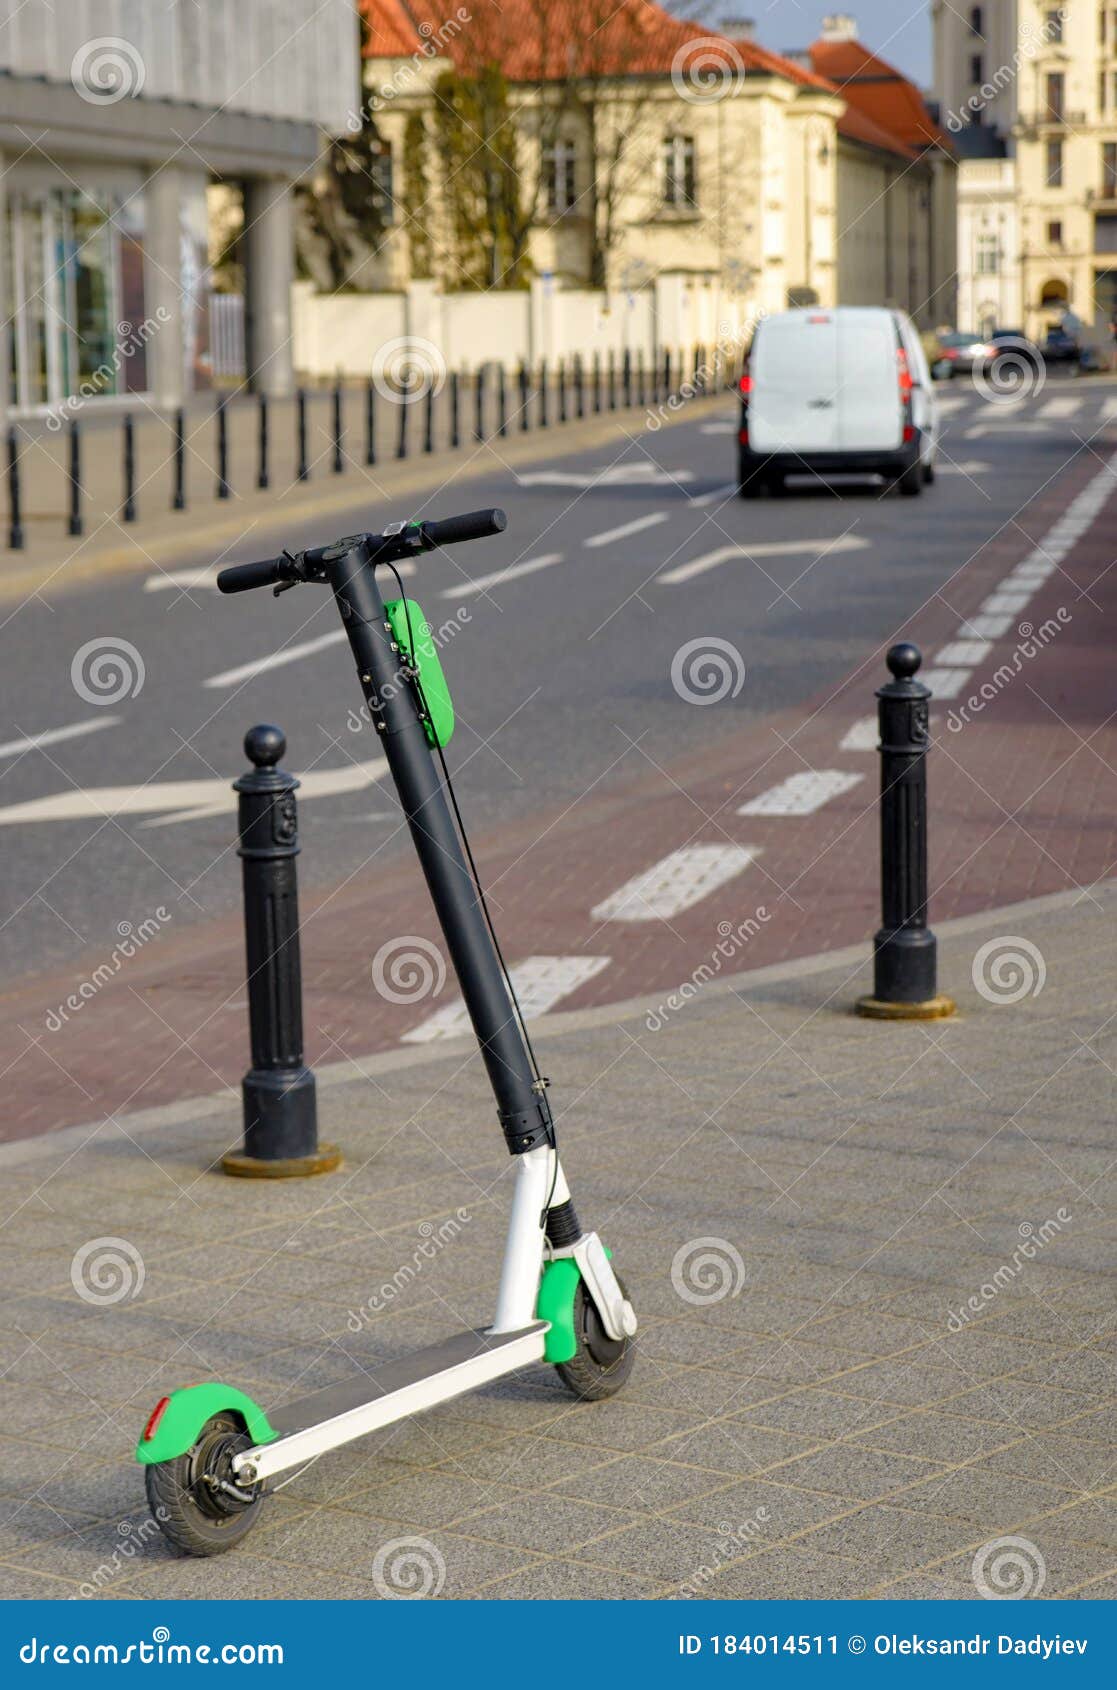 electric scooter parked on the road. modern eco electric city scooters for rent outdoors on the sidewalk. alternative transporte.